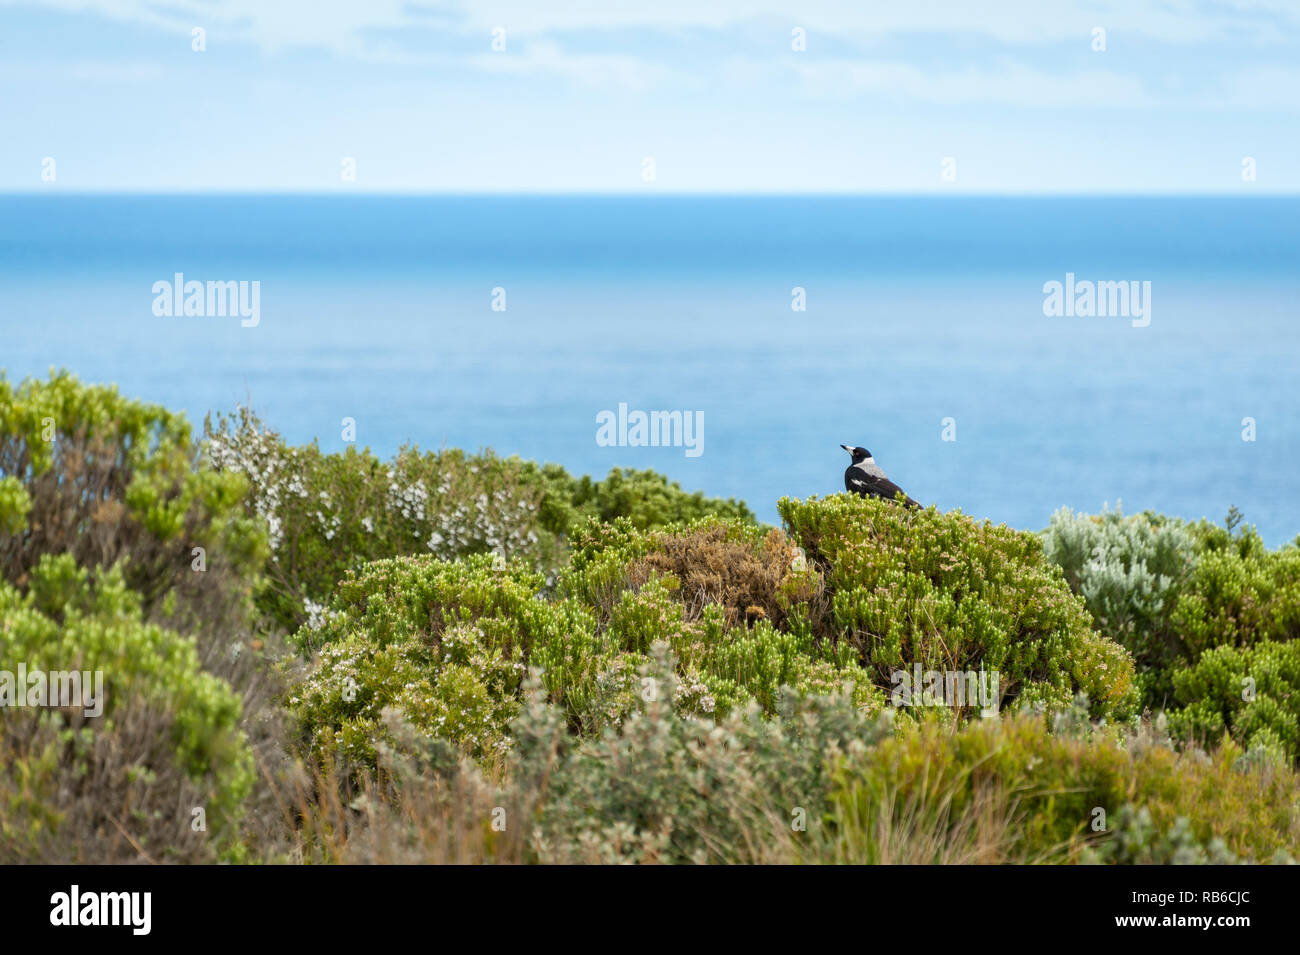 Australian magpie sitting on top of coastal scrub brush with the ocean creating a blue horizon against a cloudy sky Stock Photo